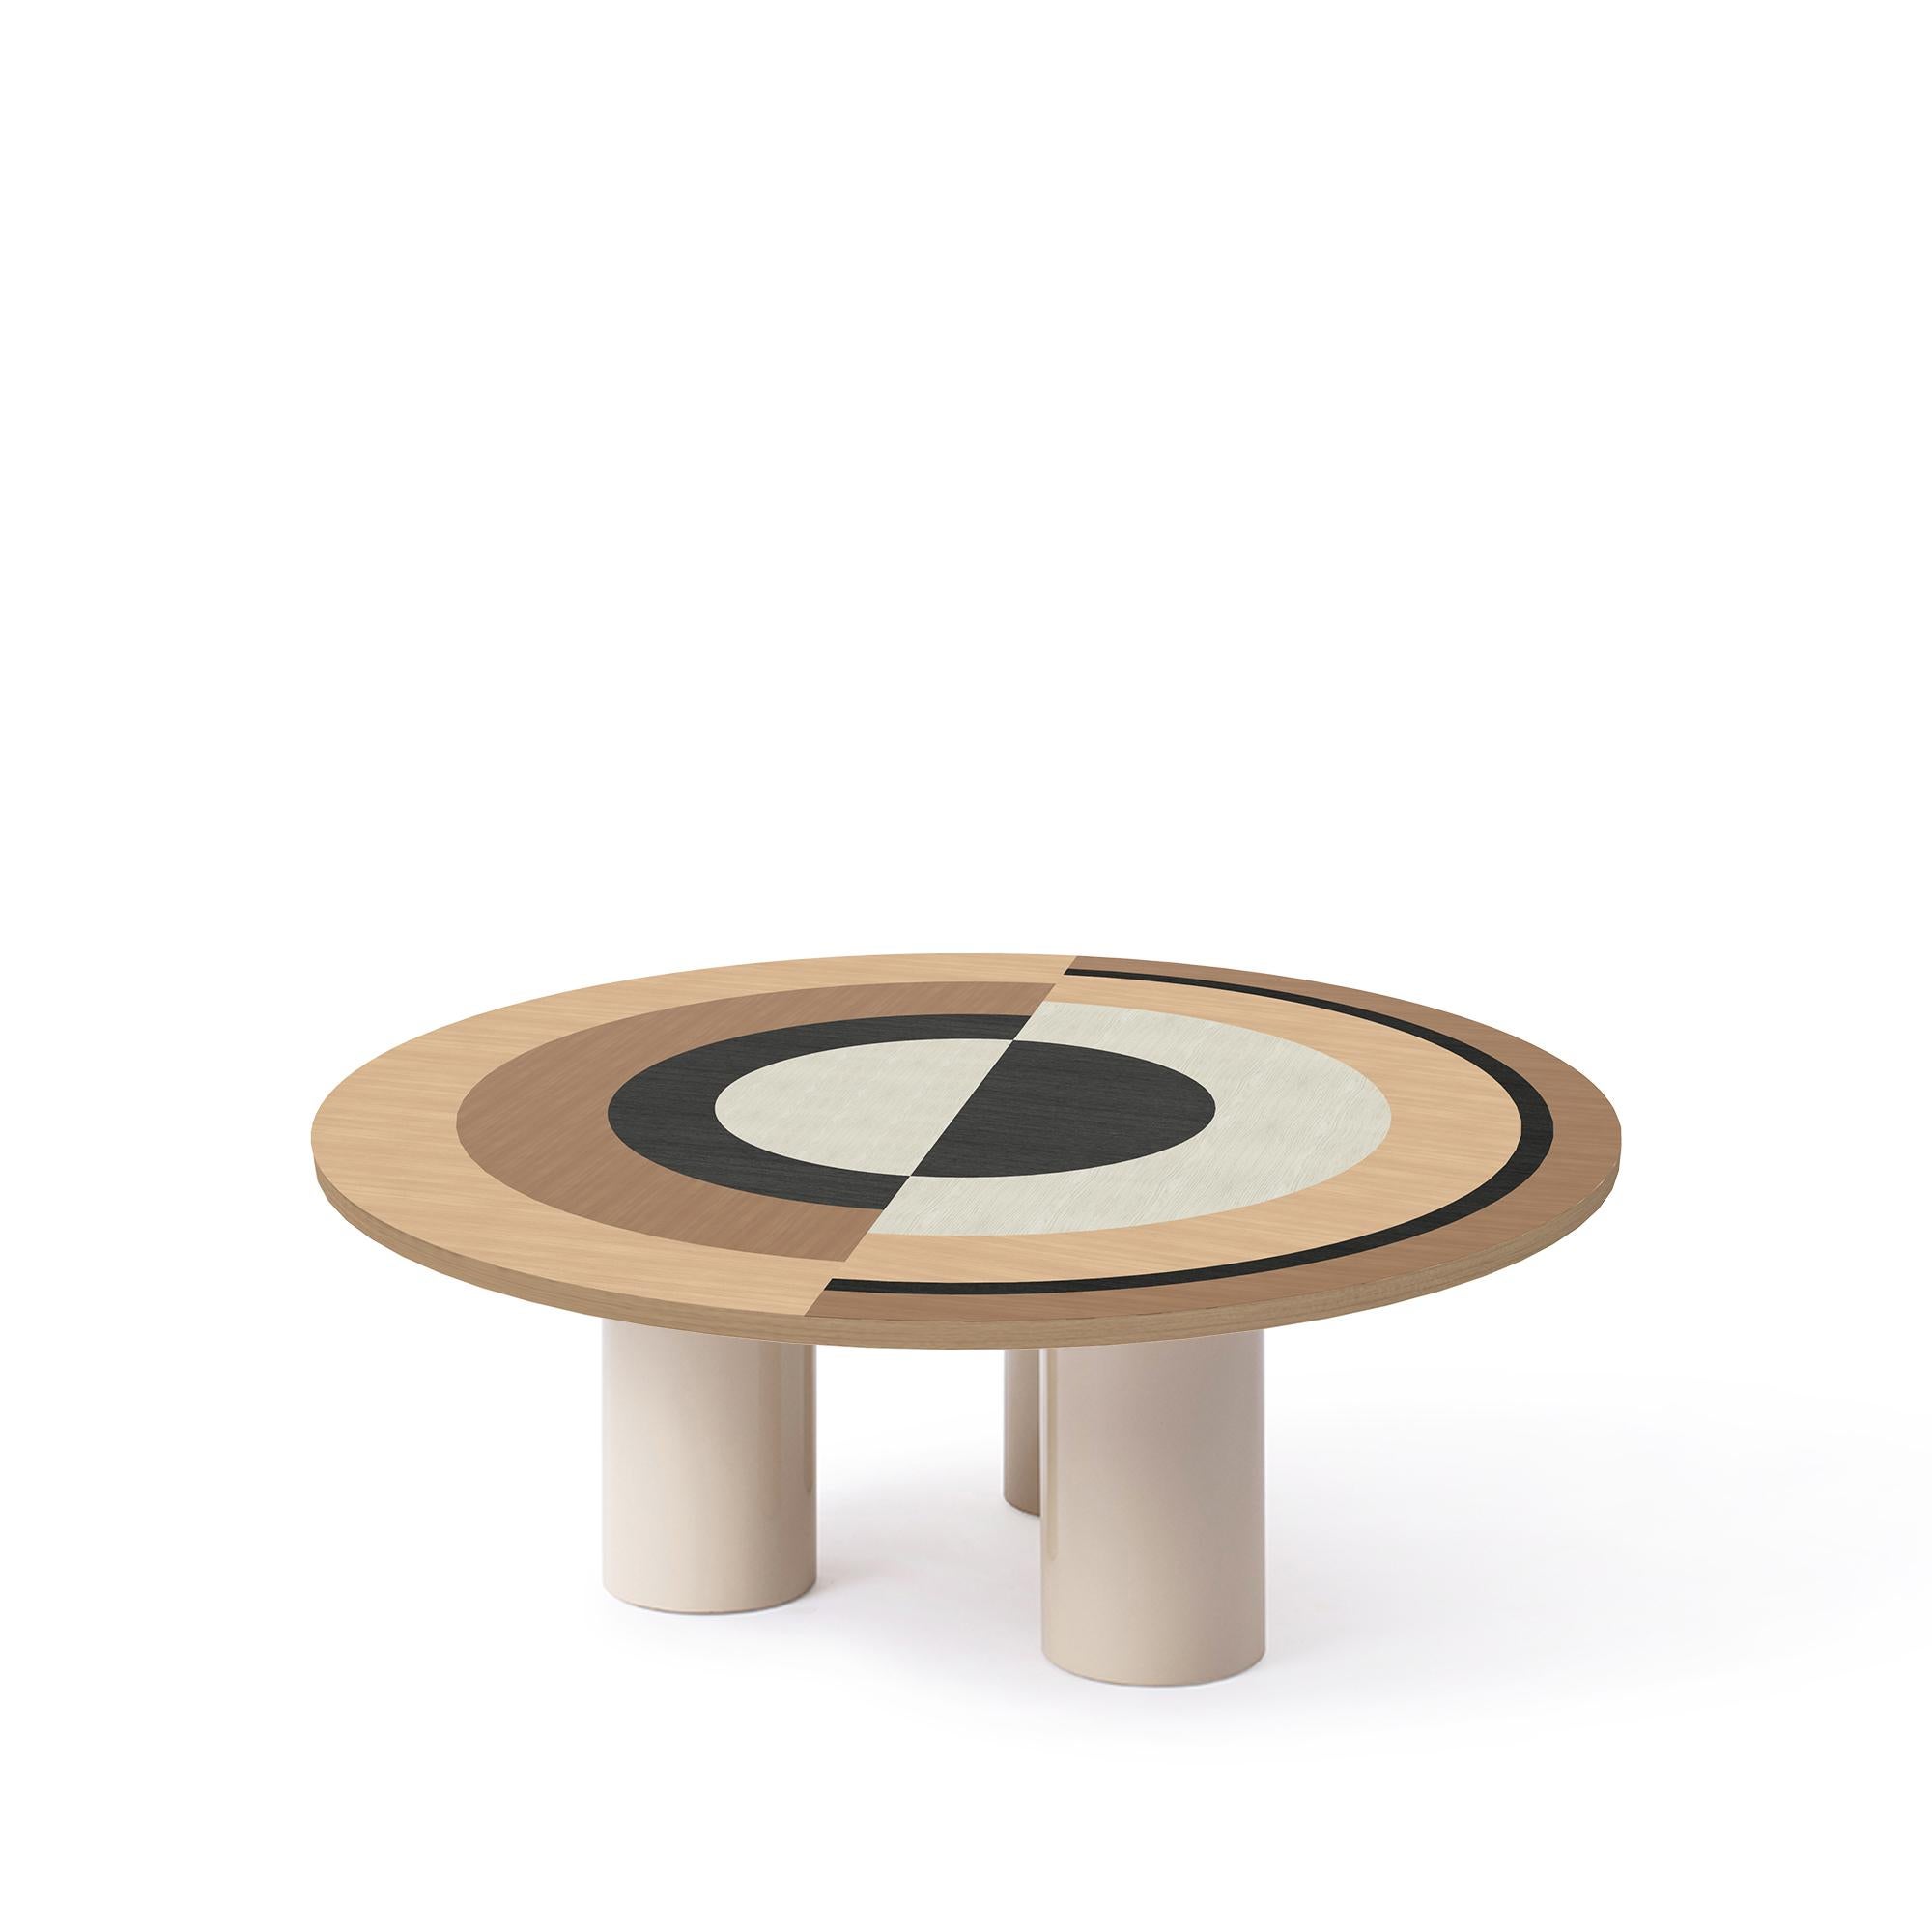 Sonia et Caetera coffee table M1 designed by Thomas Dariel
Dimensions: 
Small: Diameter 100 x Height 37 cm 
Large: Diameter 115 x Height 37 cm 
Materials: Top in painted ash veneer, fronts in the matte paint finish, Structure in MDF, Metal legs